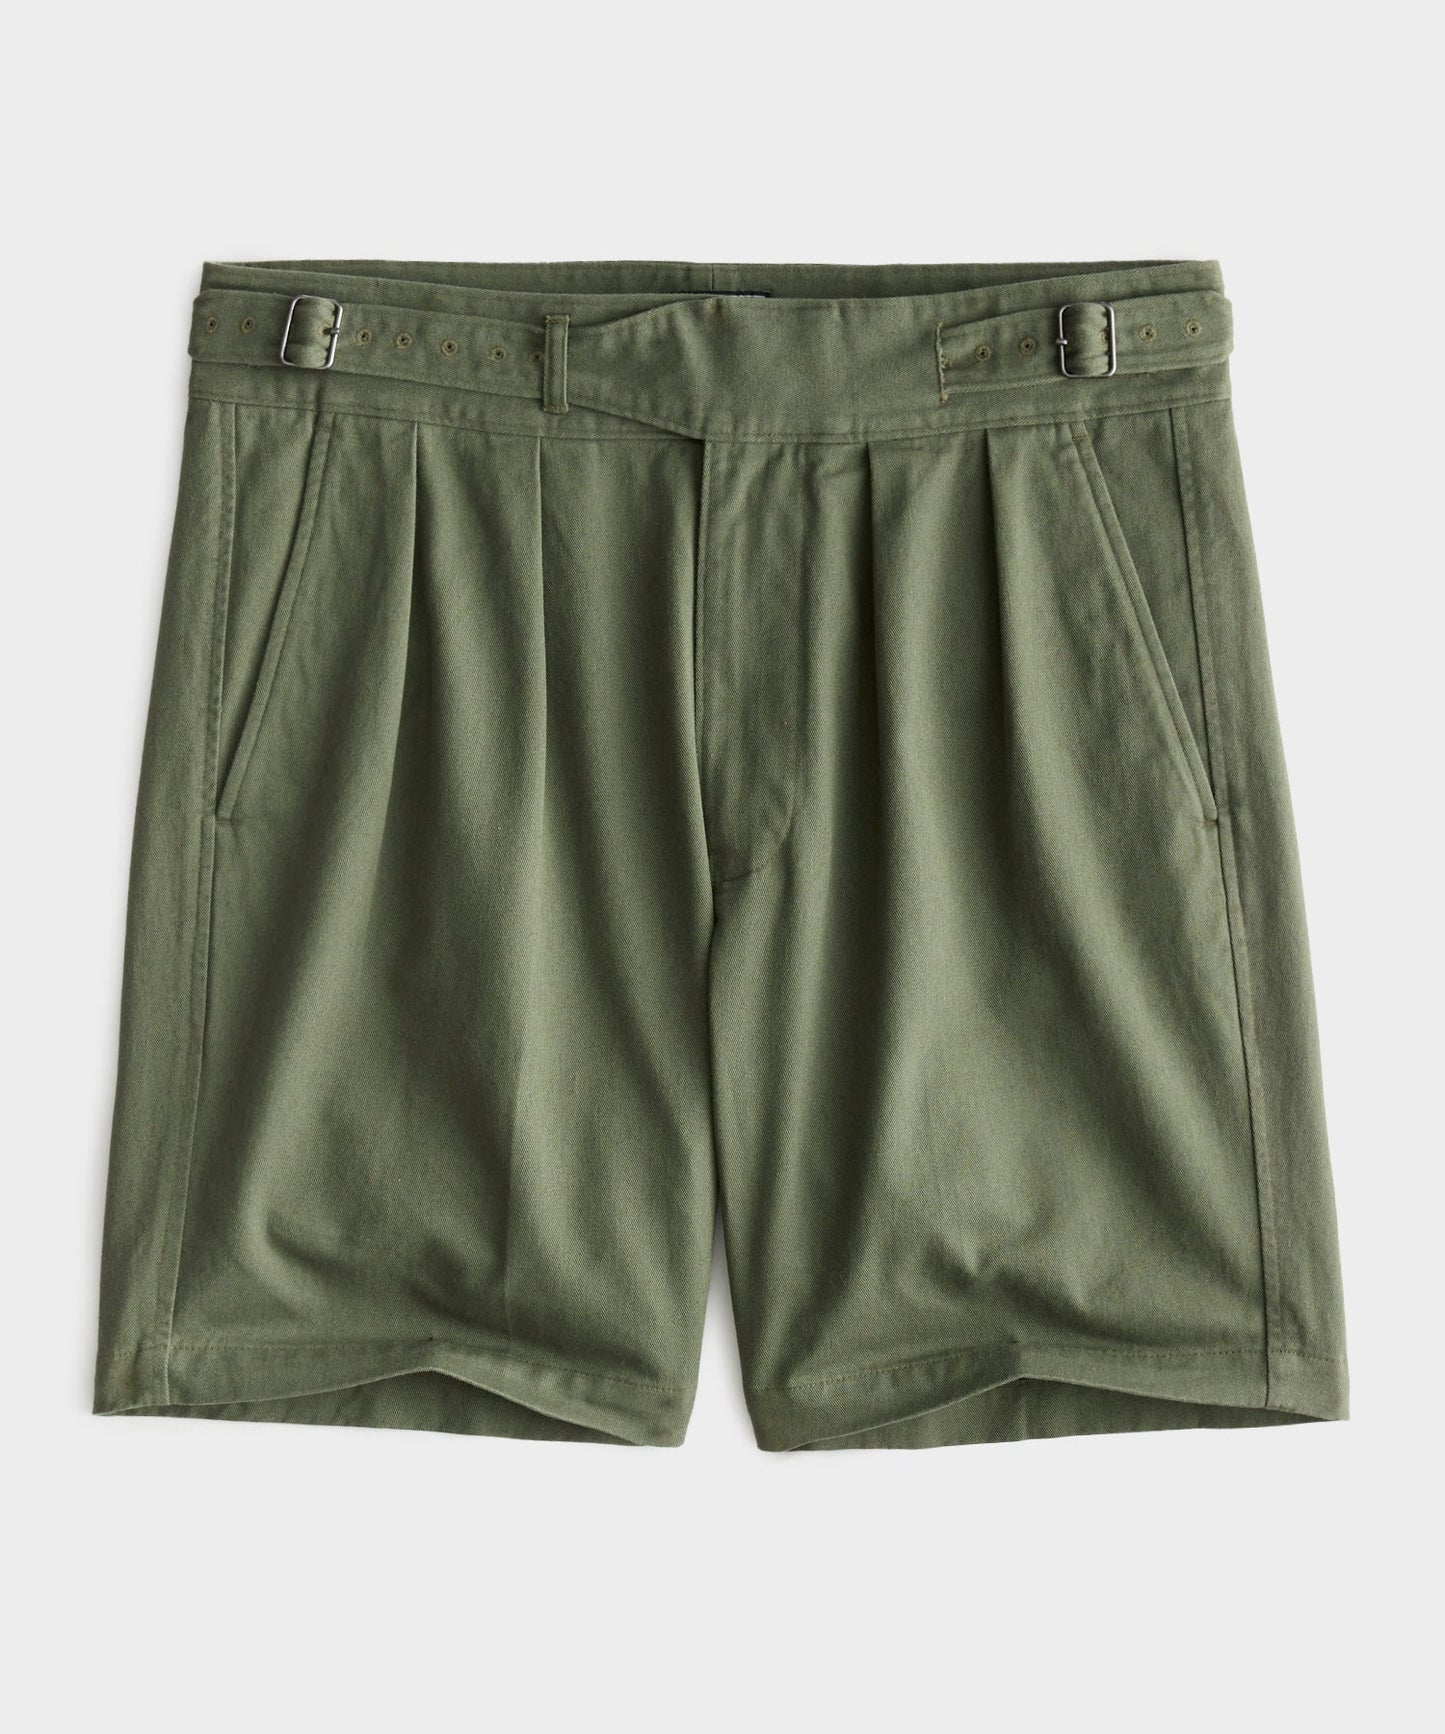 Todd Snyder - TODD SNYDER 7" GURKHA SHORT IN ARMY GREEN - Rent With Thred